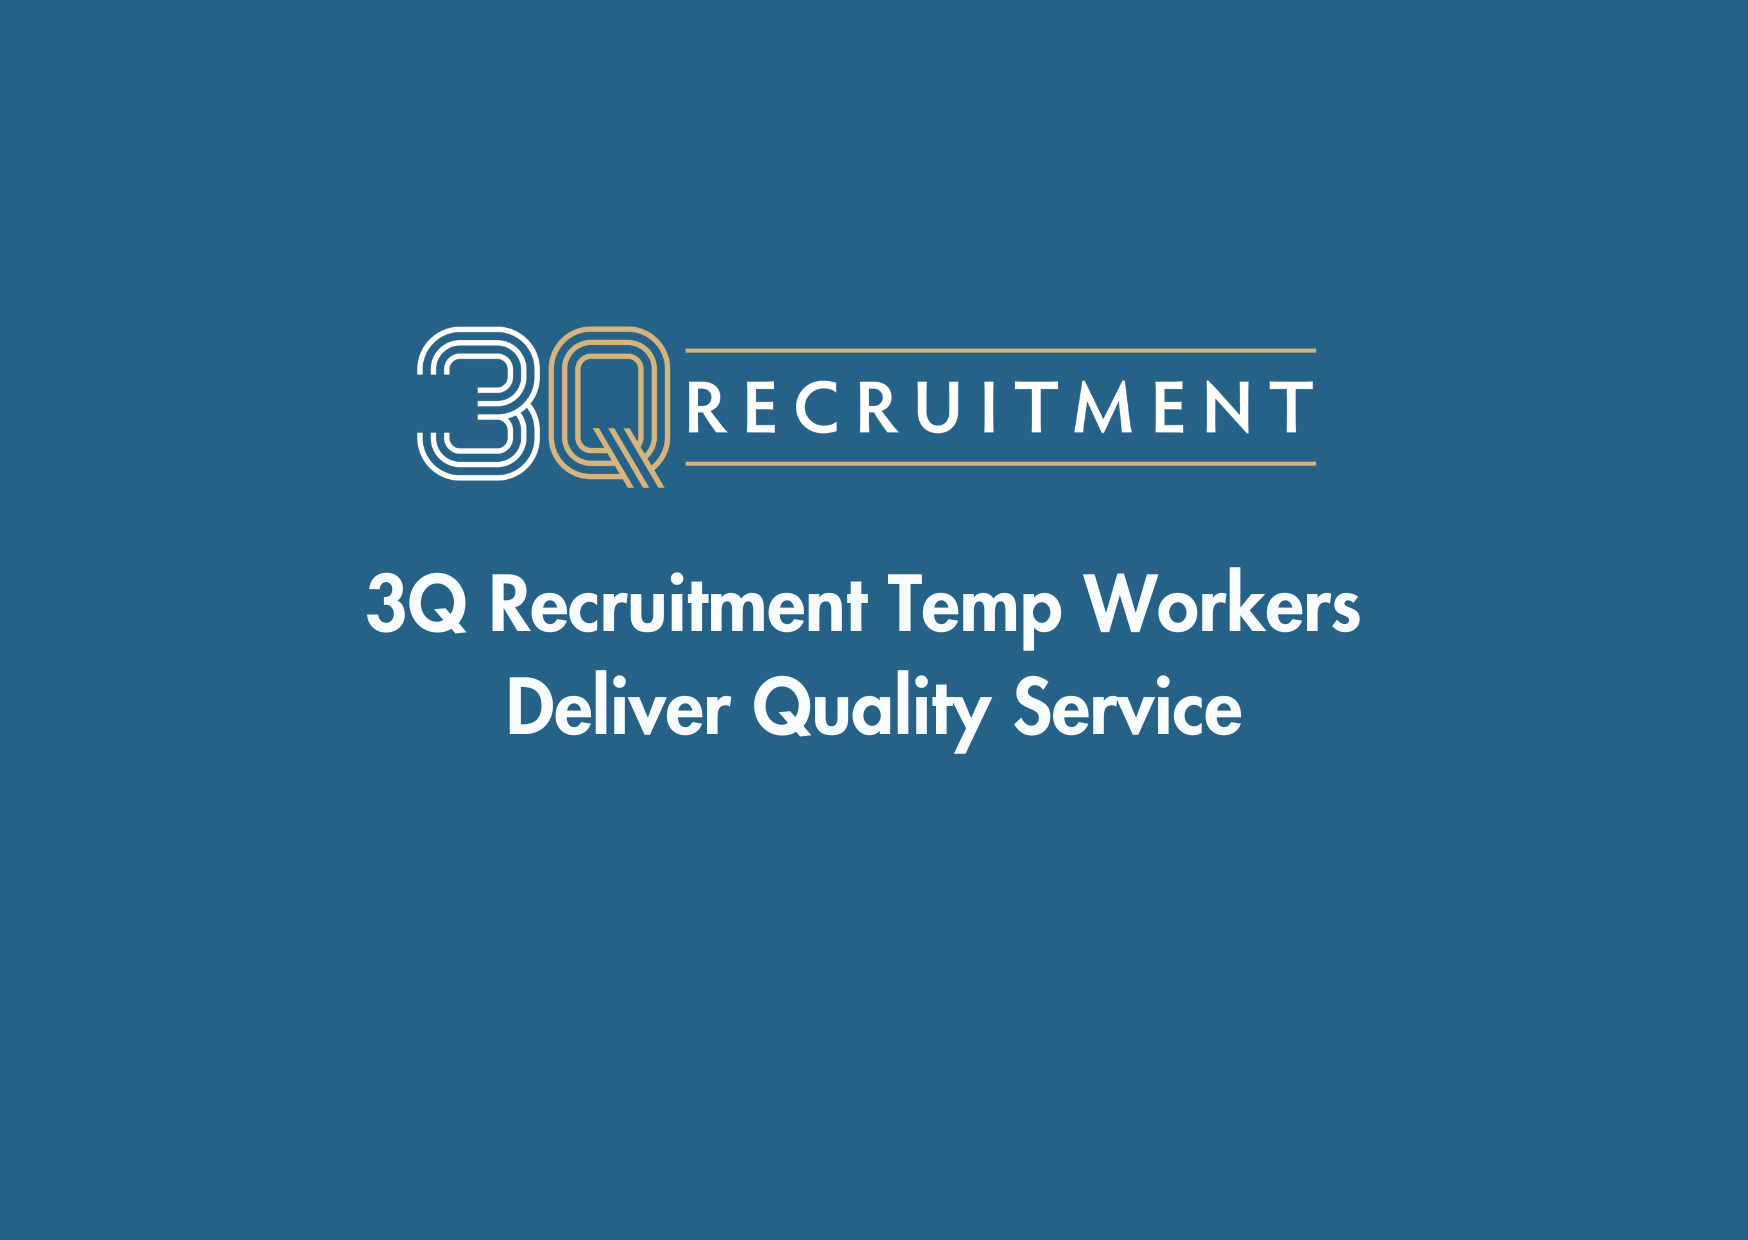 3Q Recruitment Temp Workers Deliver Quality Service